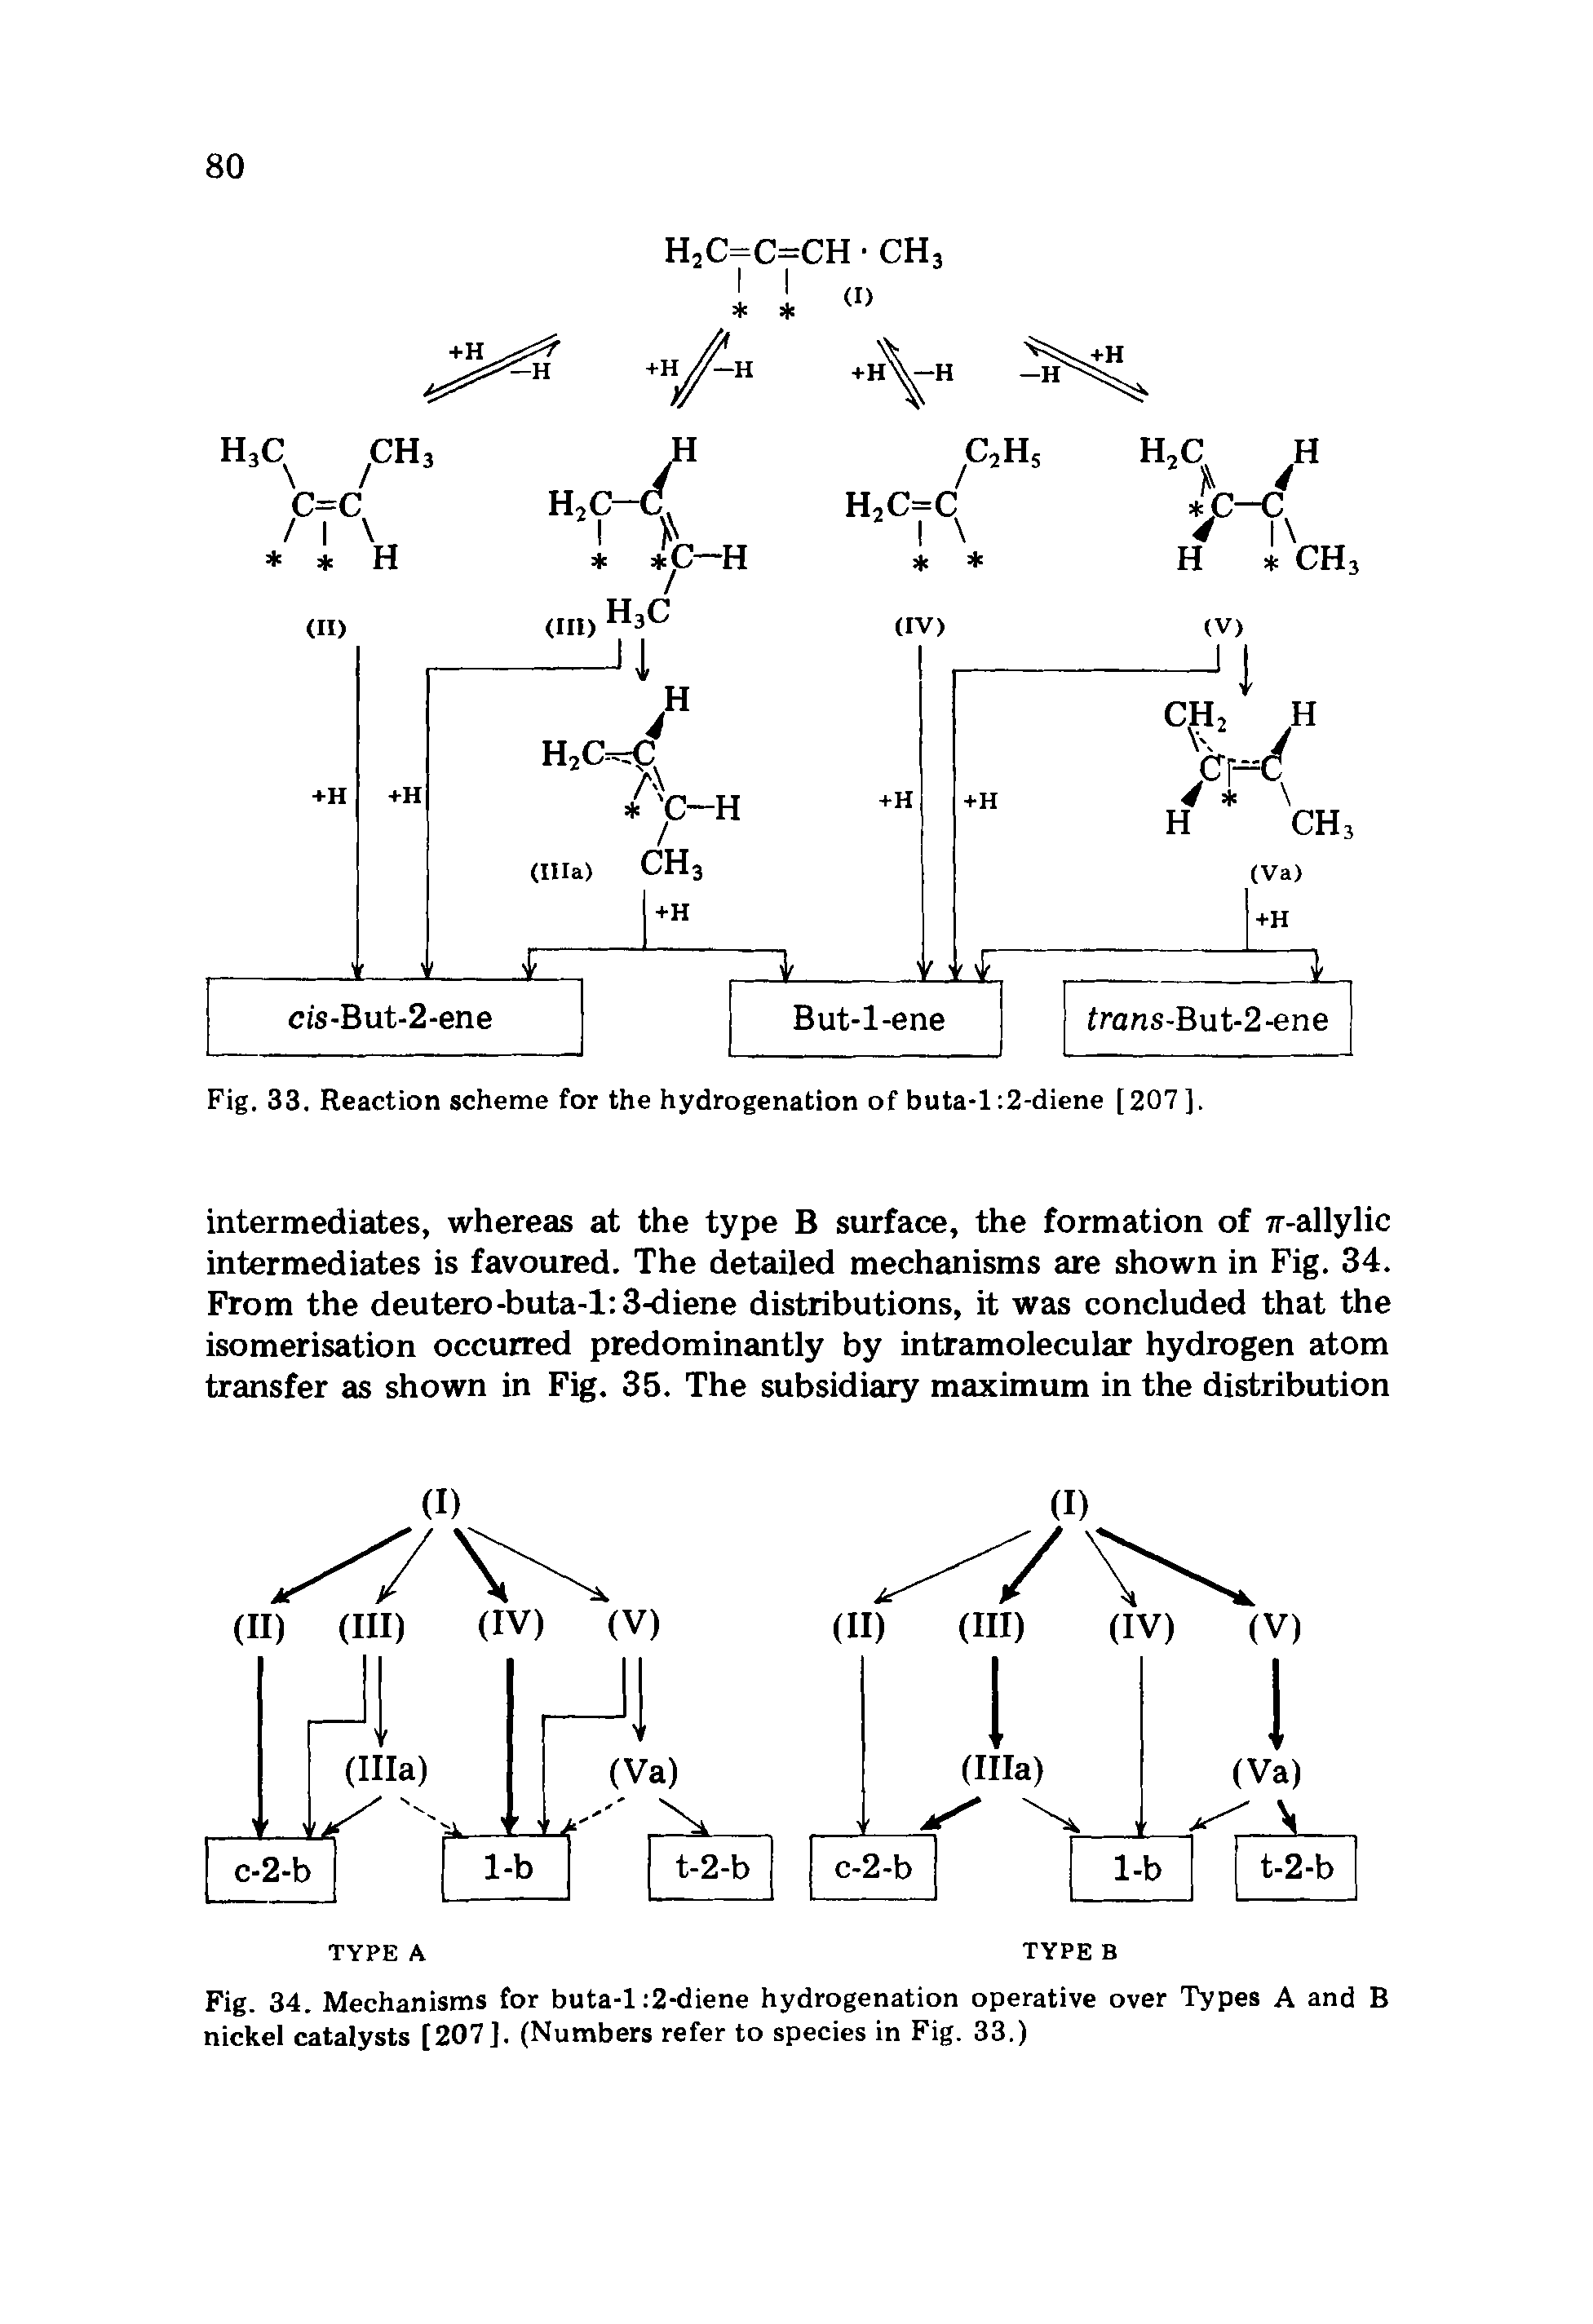 Fig. 34. Mechanisms for buta-1 2-diene hydrogenation operative over Types A and B nickel catalysts [207]. (Numbers refer to species in Fig. 33.)...